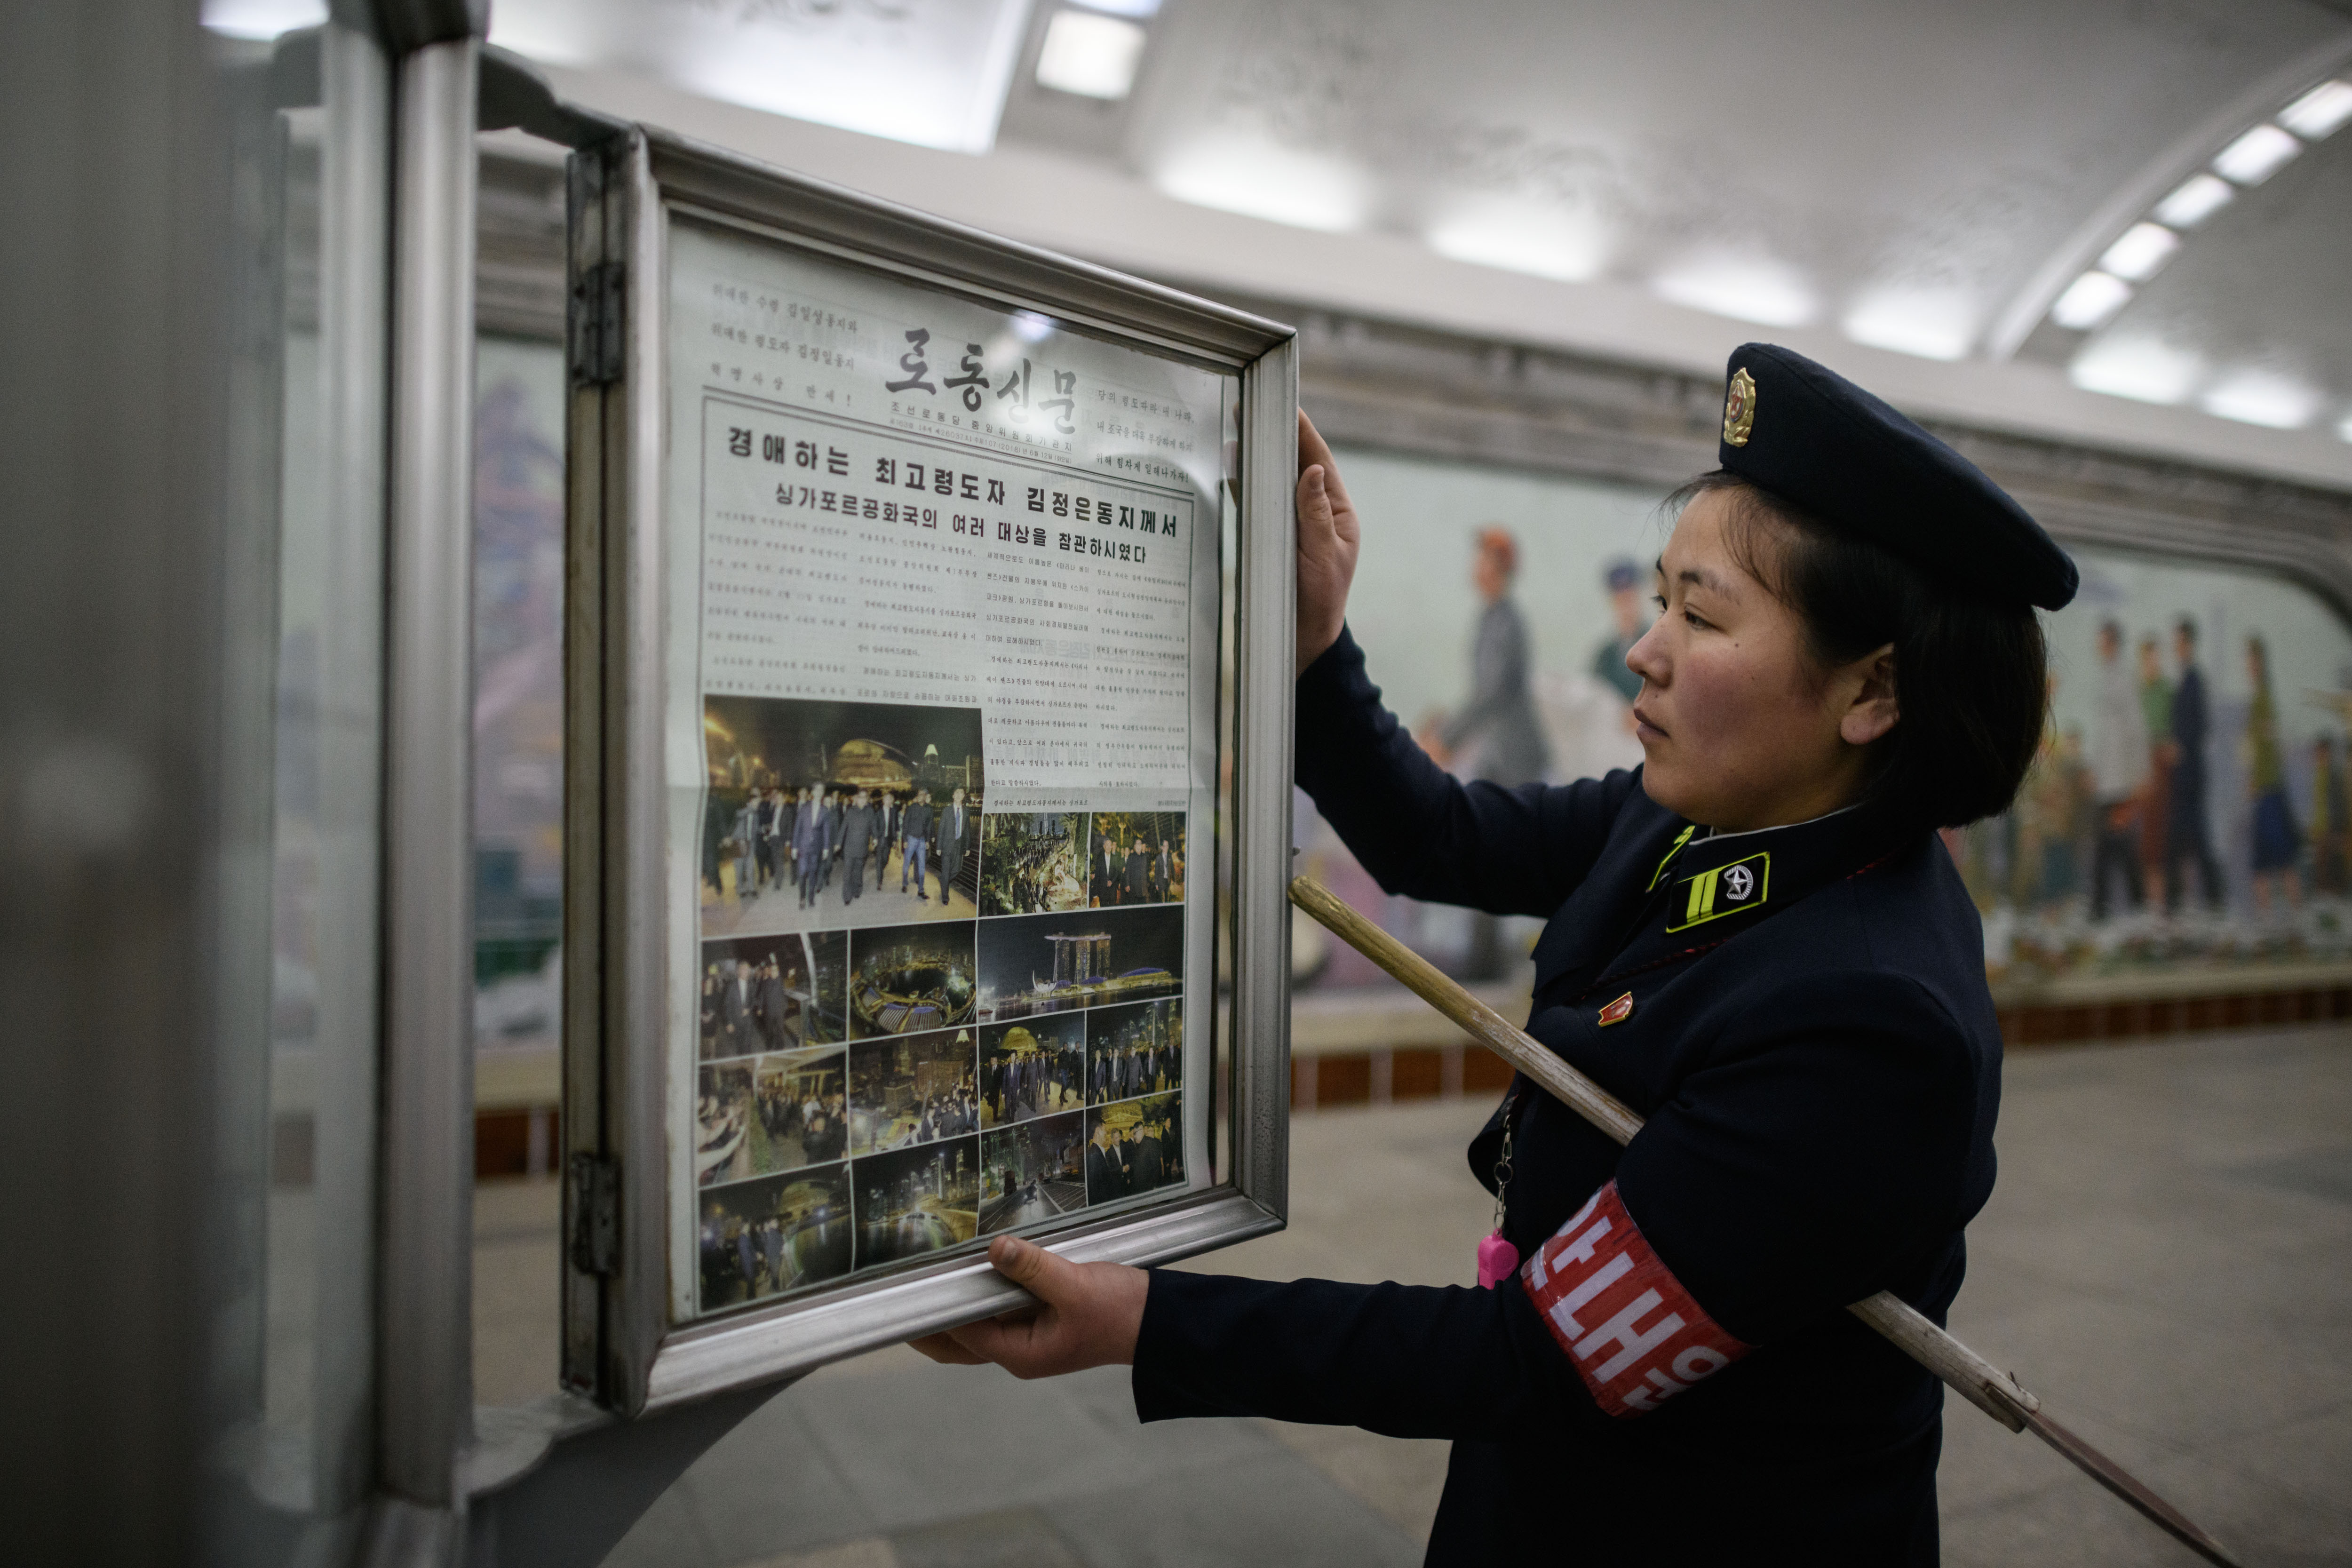 A conductor changes the Rodong Sinmun newspaper showing images of North Korean leader Kim Jong Un in Singapore ahead of his meeting with Trump.